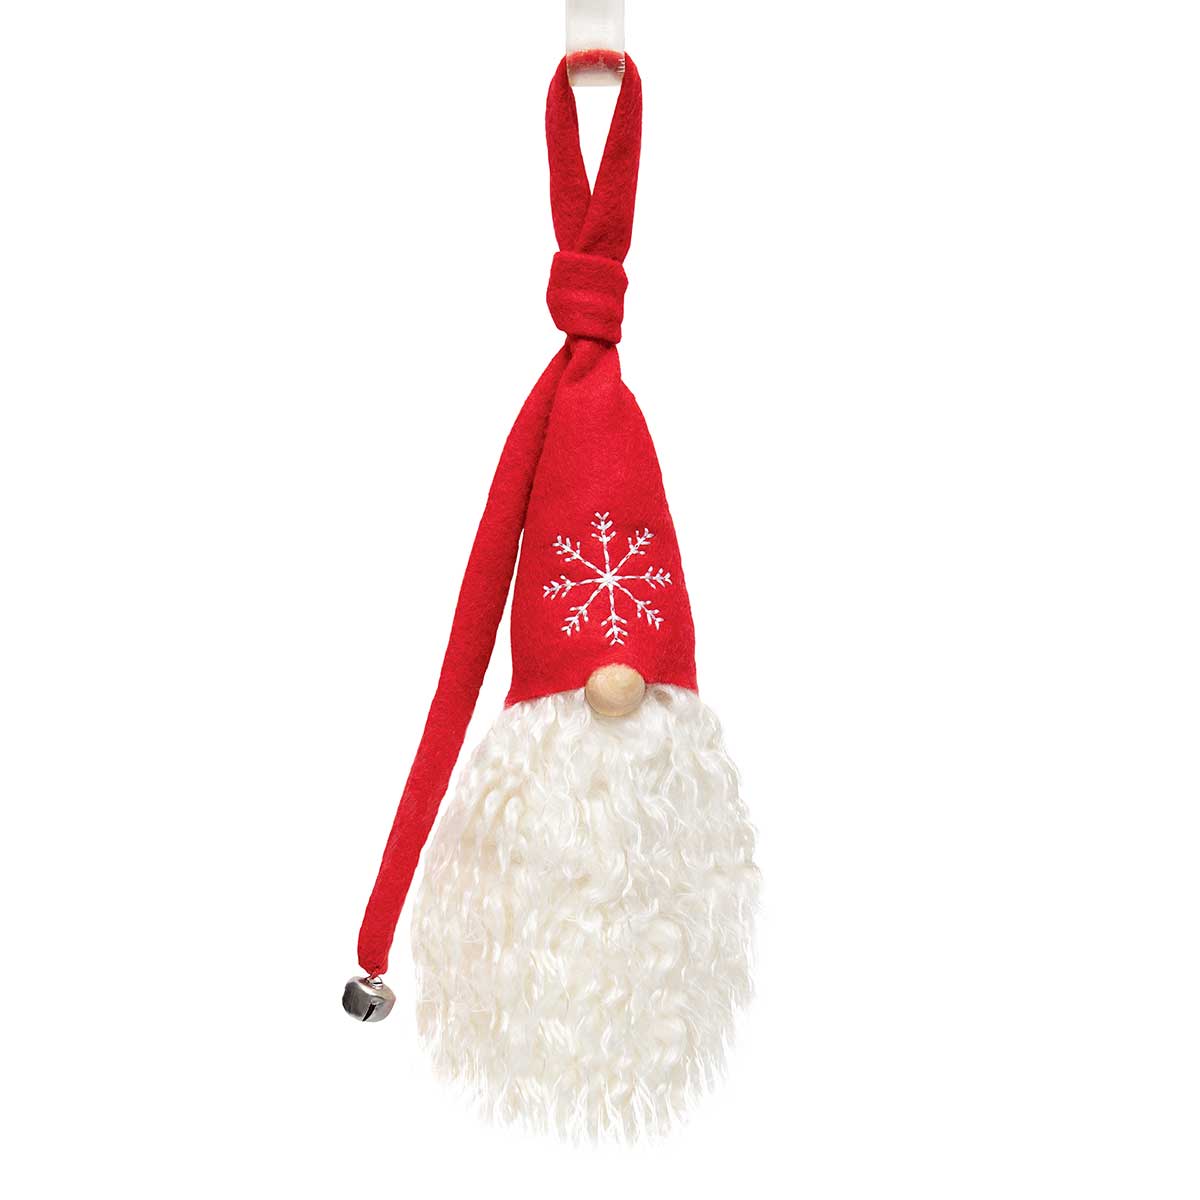 !PIERRE' NOEL GNOME RED WITH JINGLE BELL, SNOWFLAKE